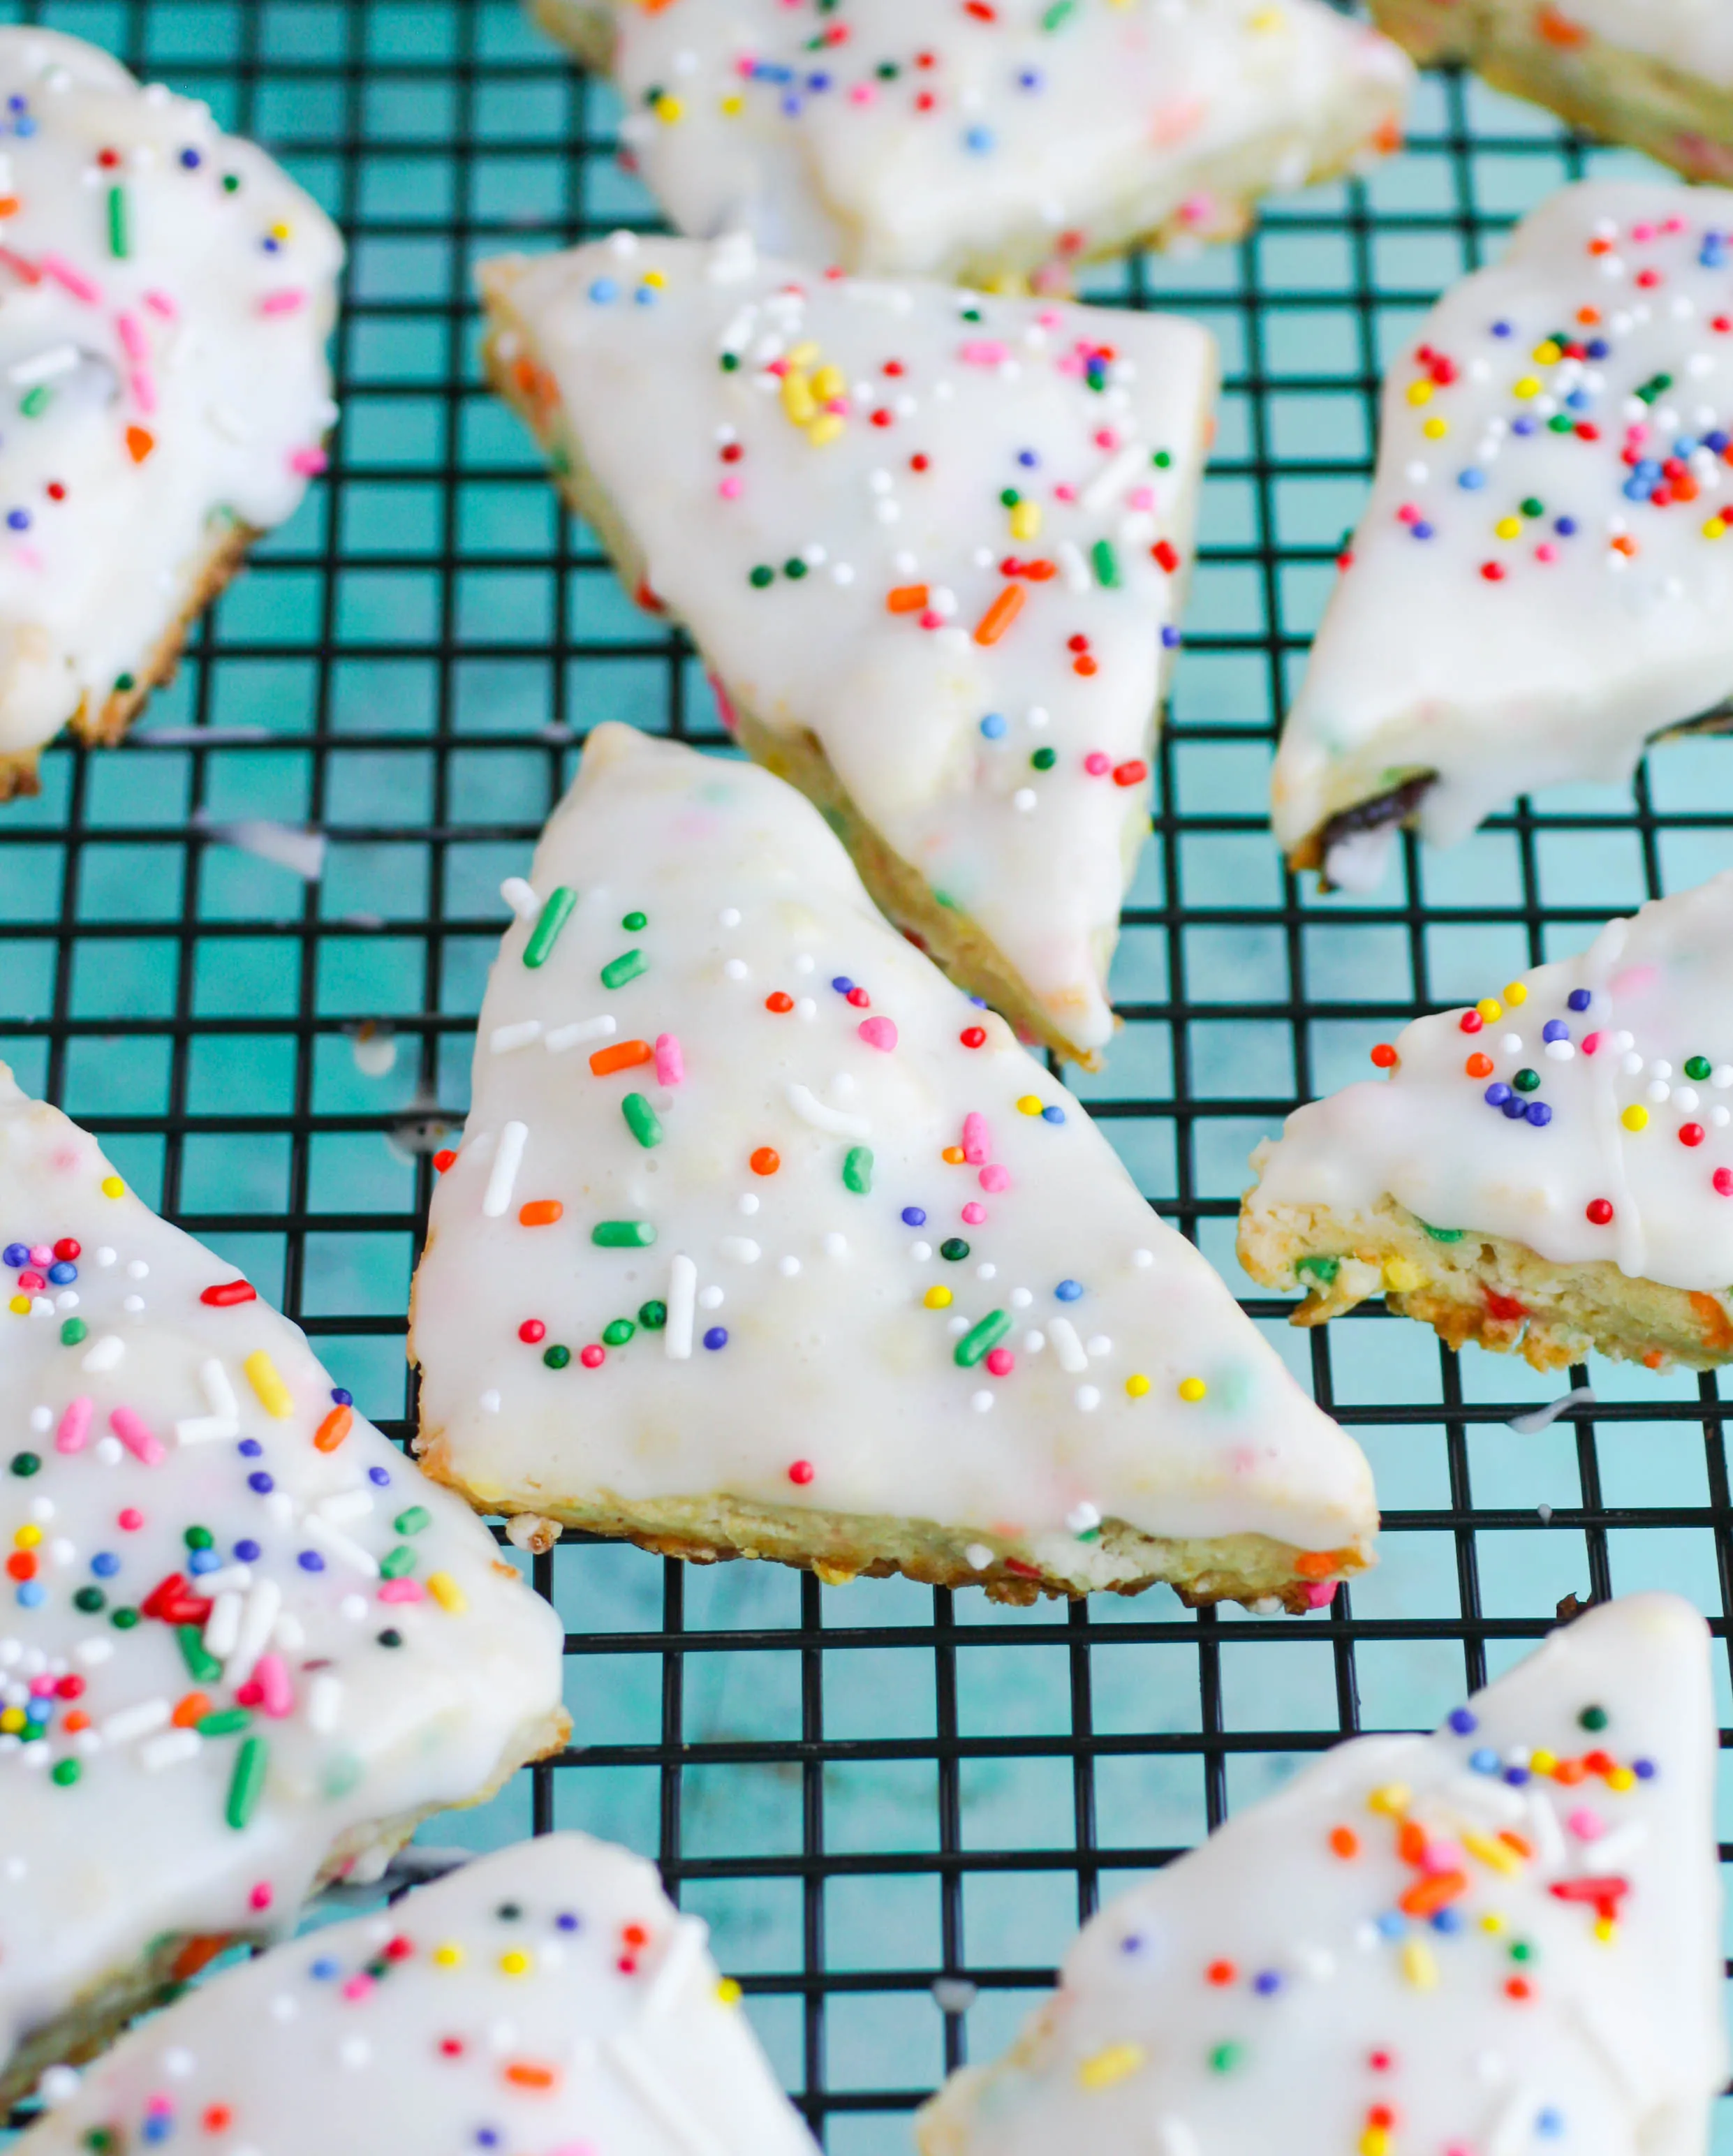 Mini Funfetti Scones are, well, fun! You'll love these as dessert or first thing in the morning with coffee, tea, or milk.